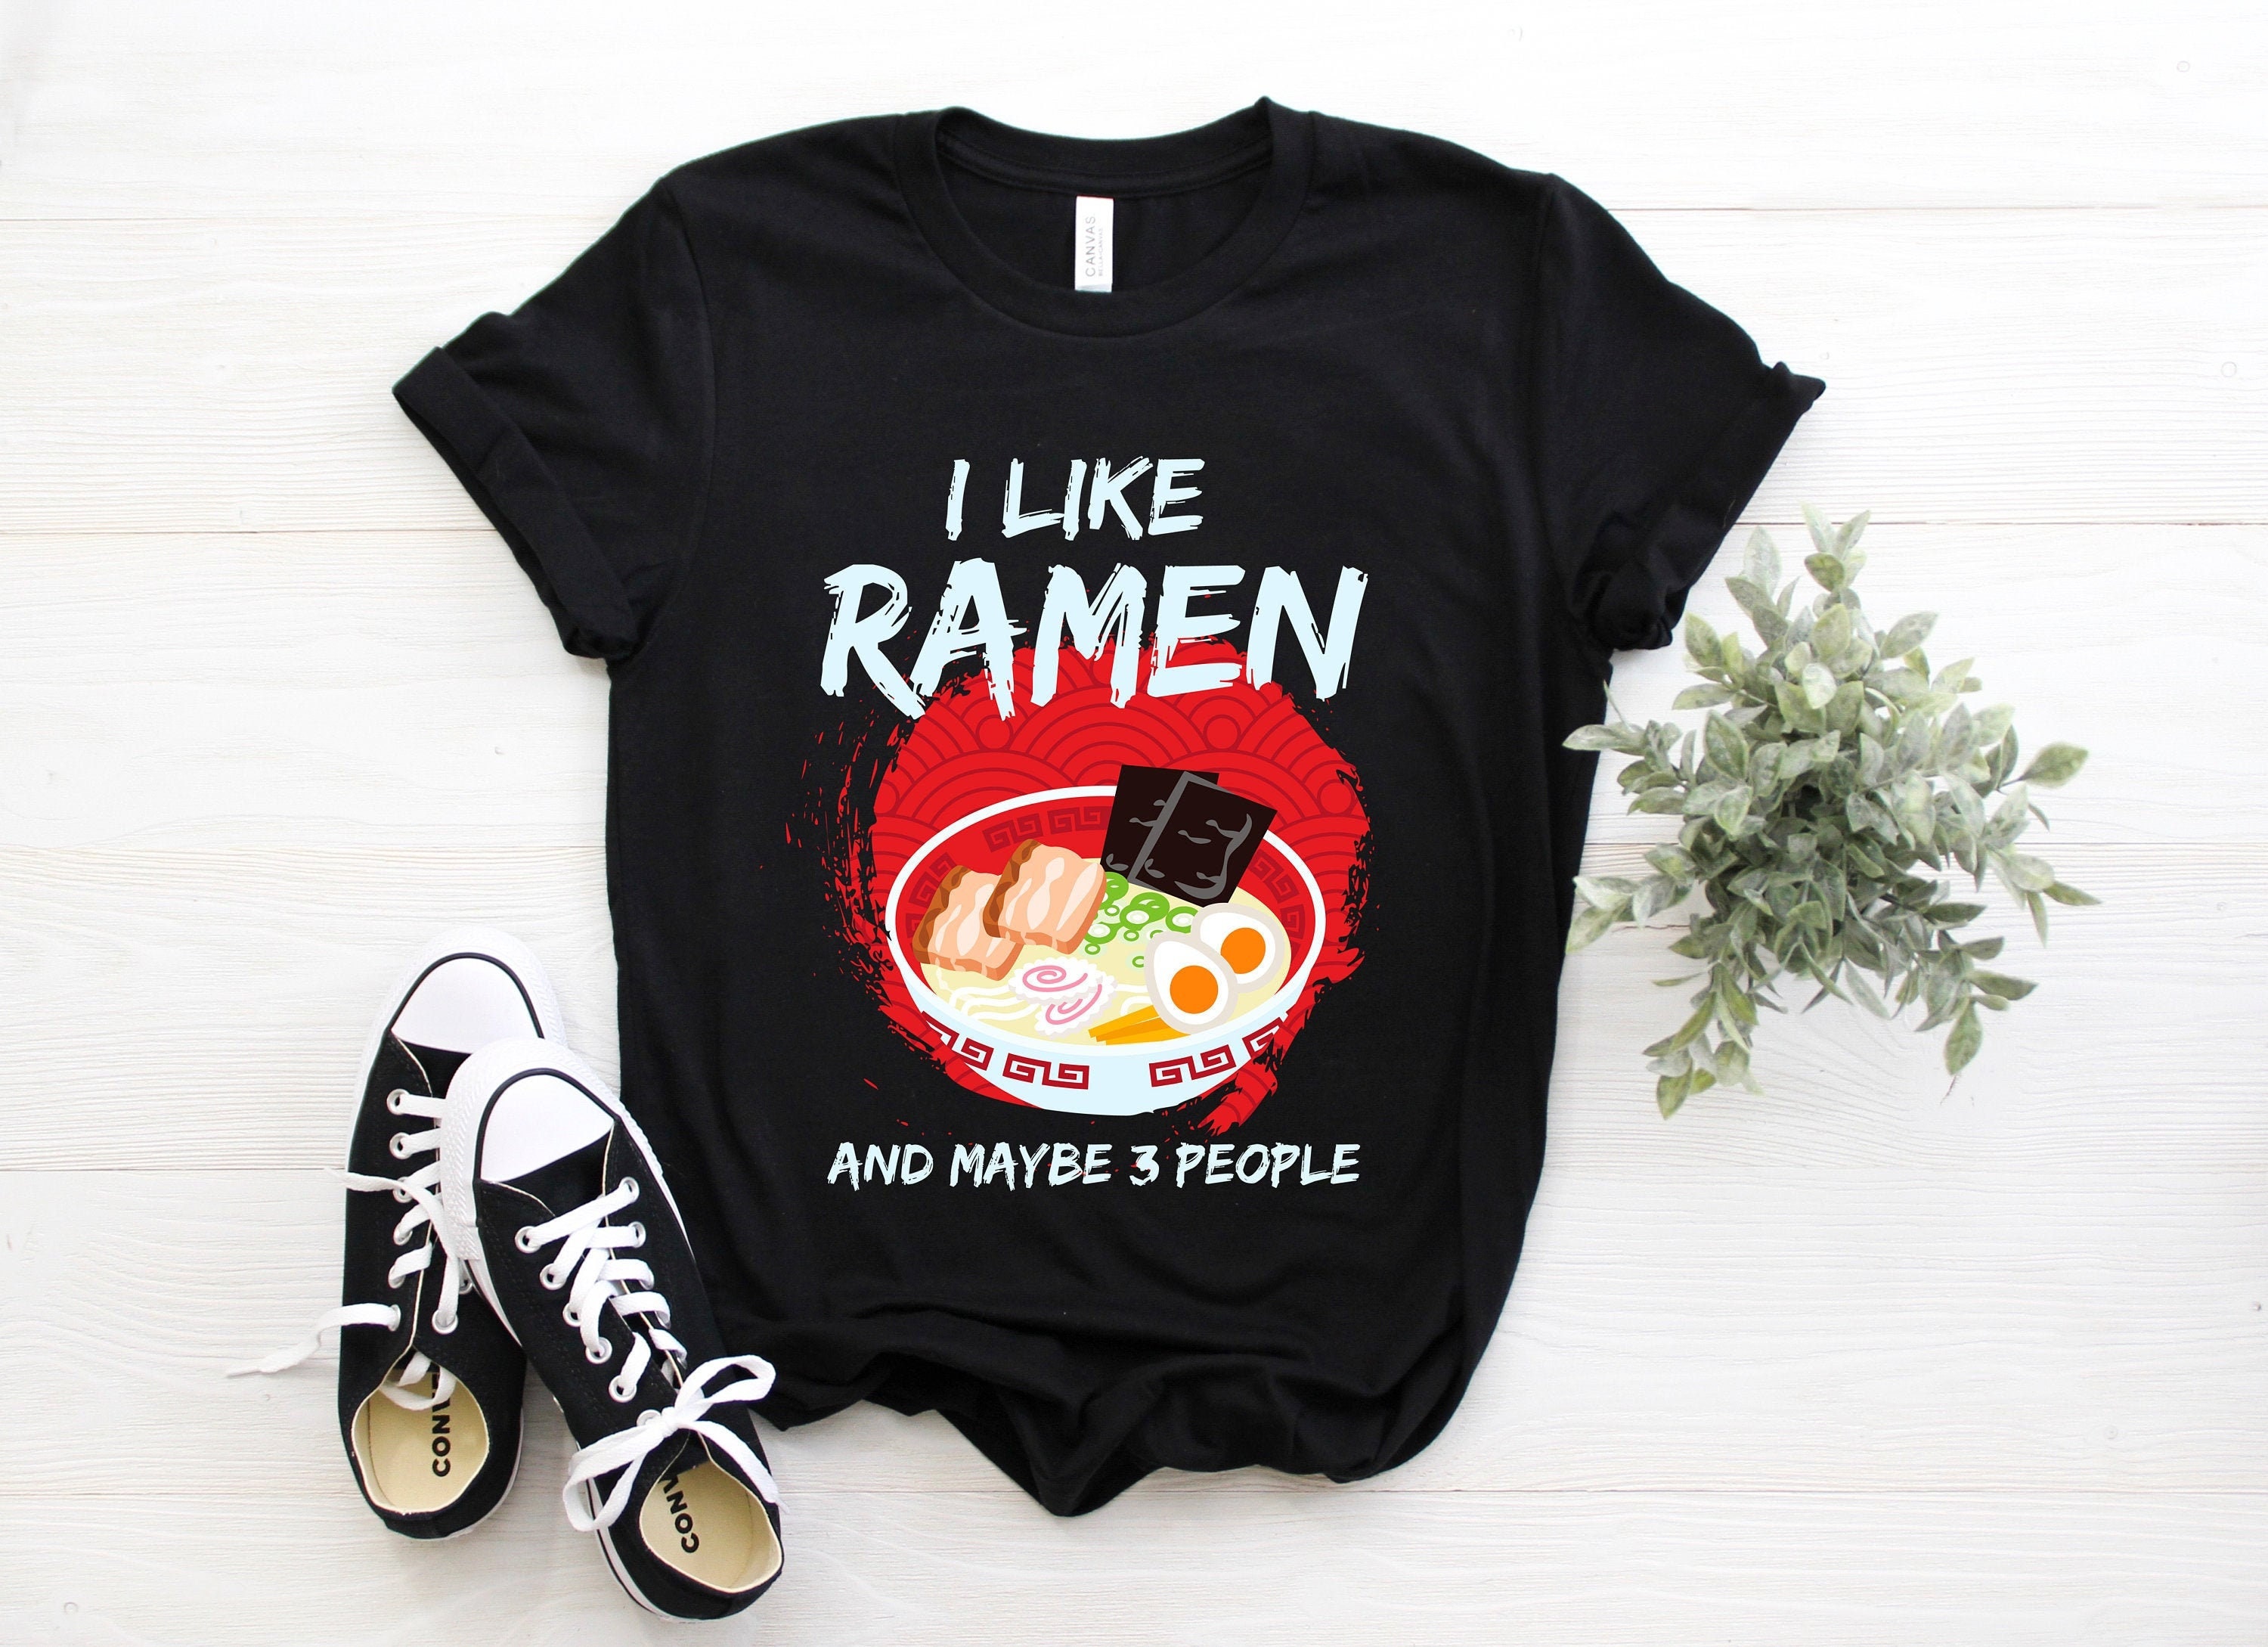 Cute Ramen Shirt, I Love Japanese Noodles Tank Top, Kawaii Crop Tee, Asian Culture Foodie Lover T Shirts Funny Food Bowl Gifts Party Present